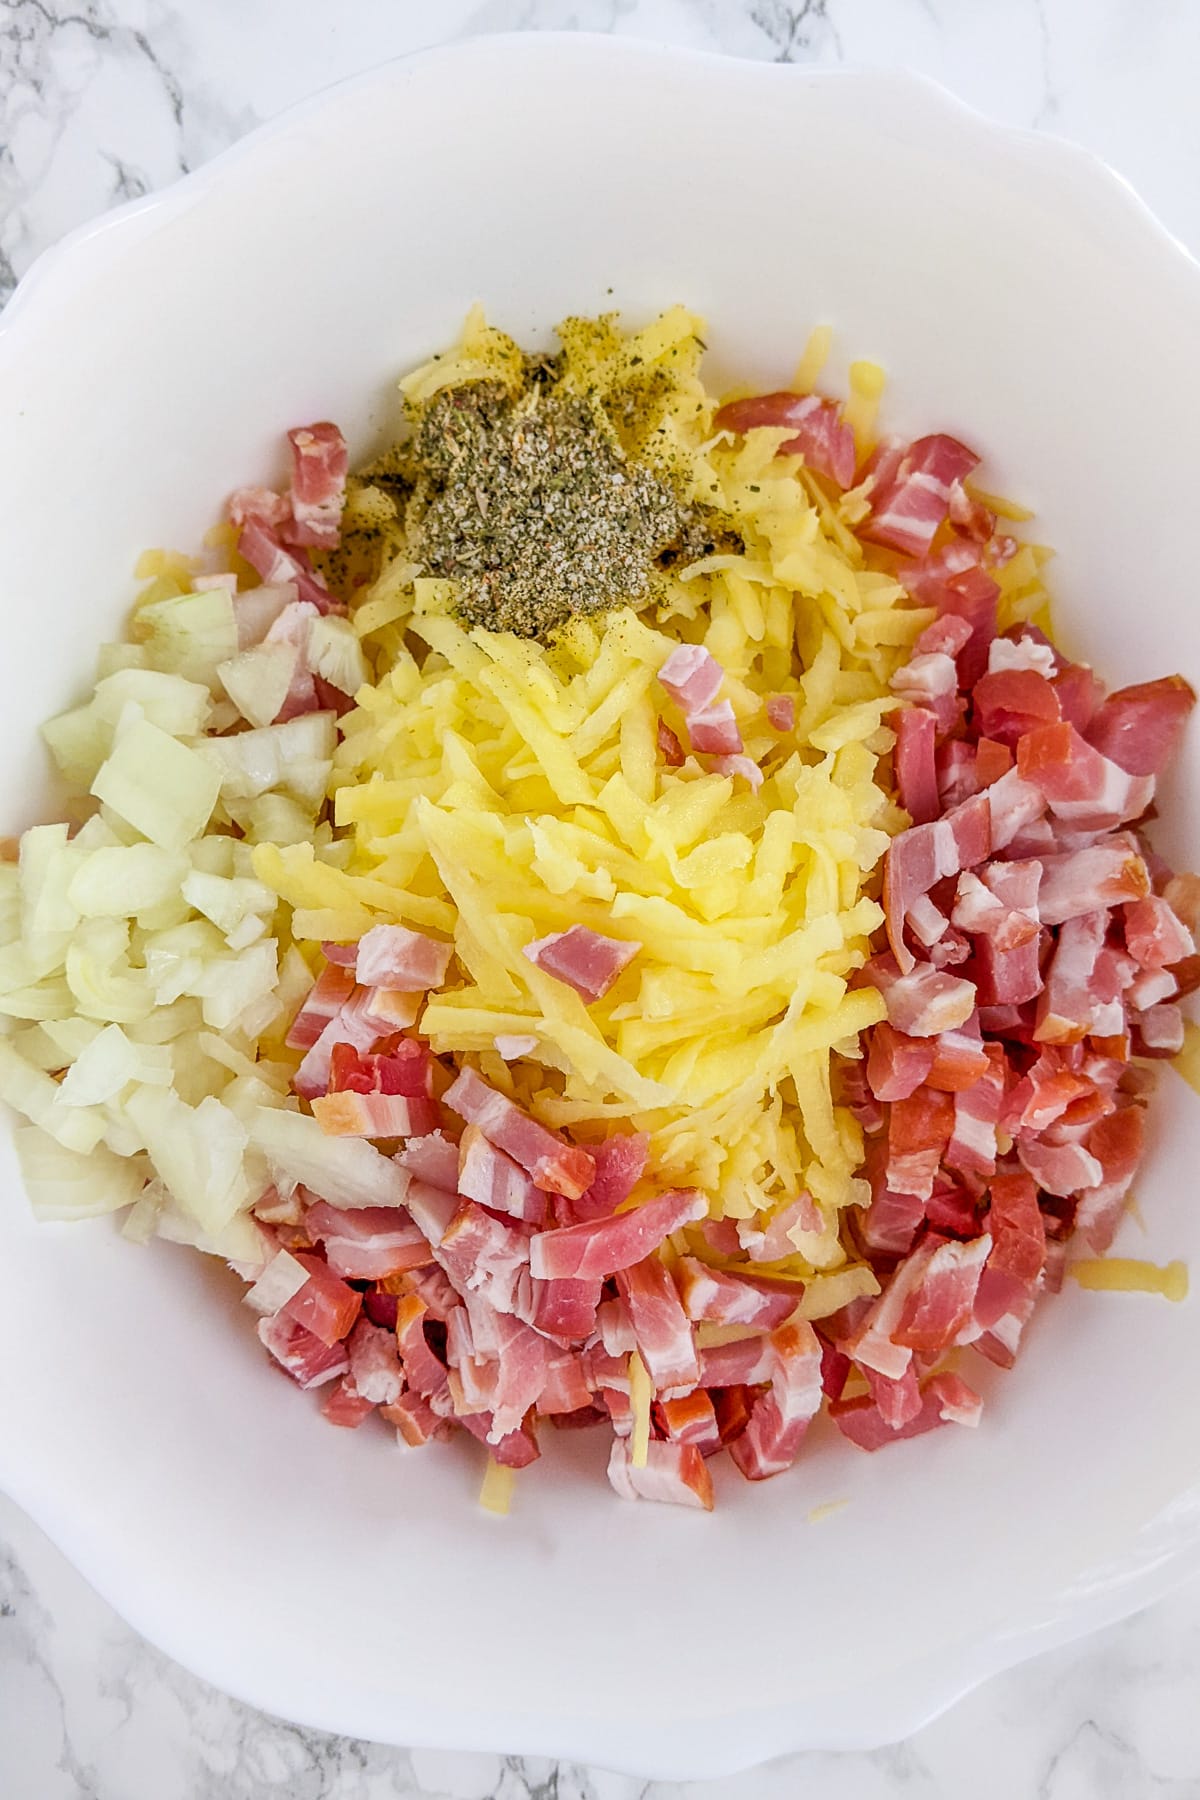 Shredded potatoes, sliced bacon, chopped onions and black pepper.